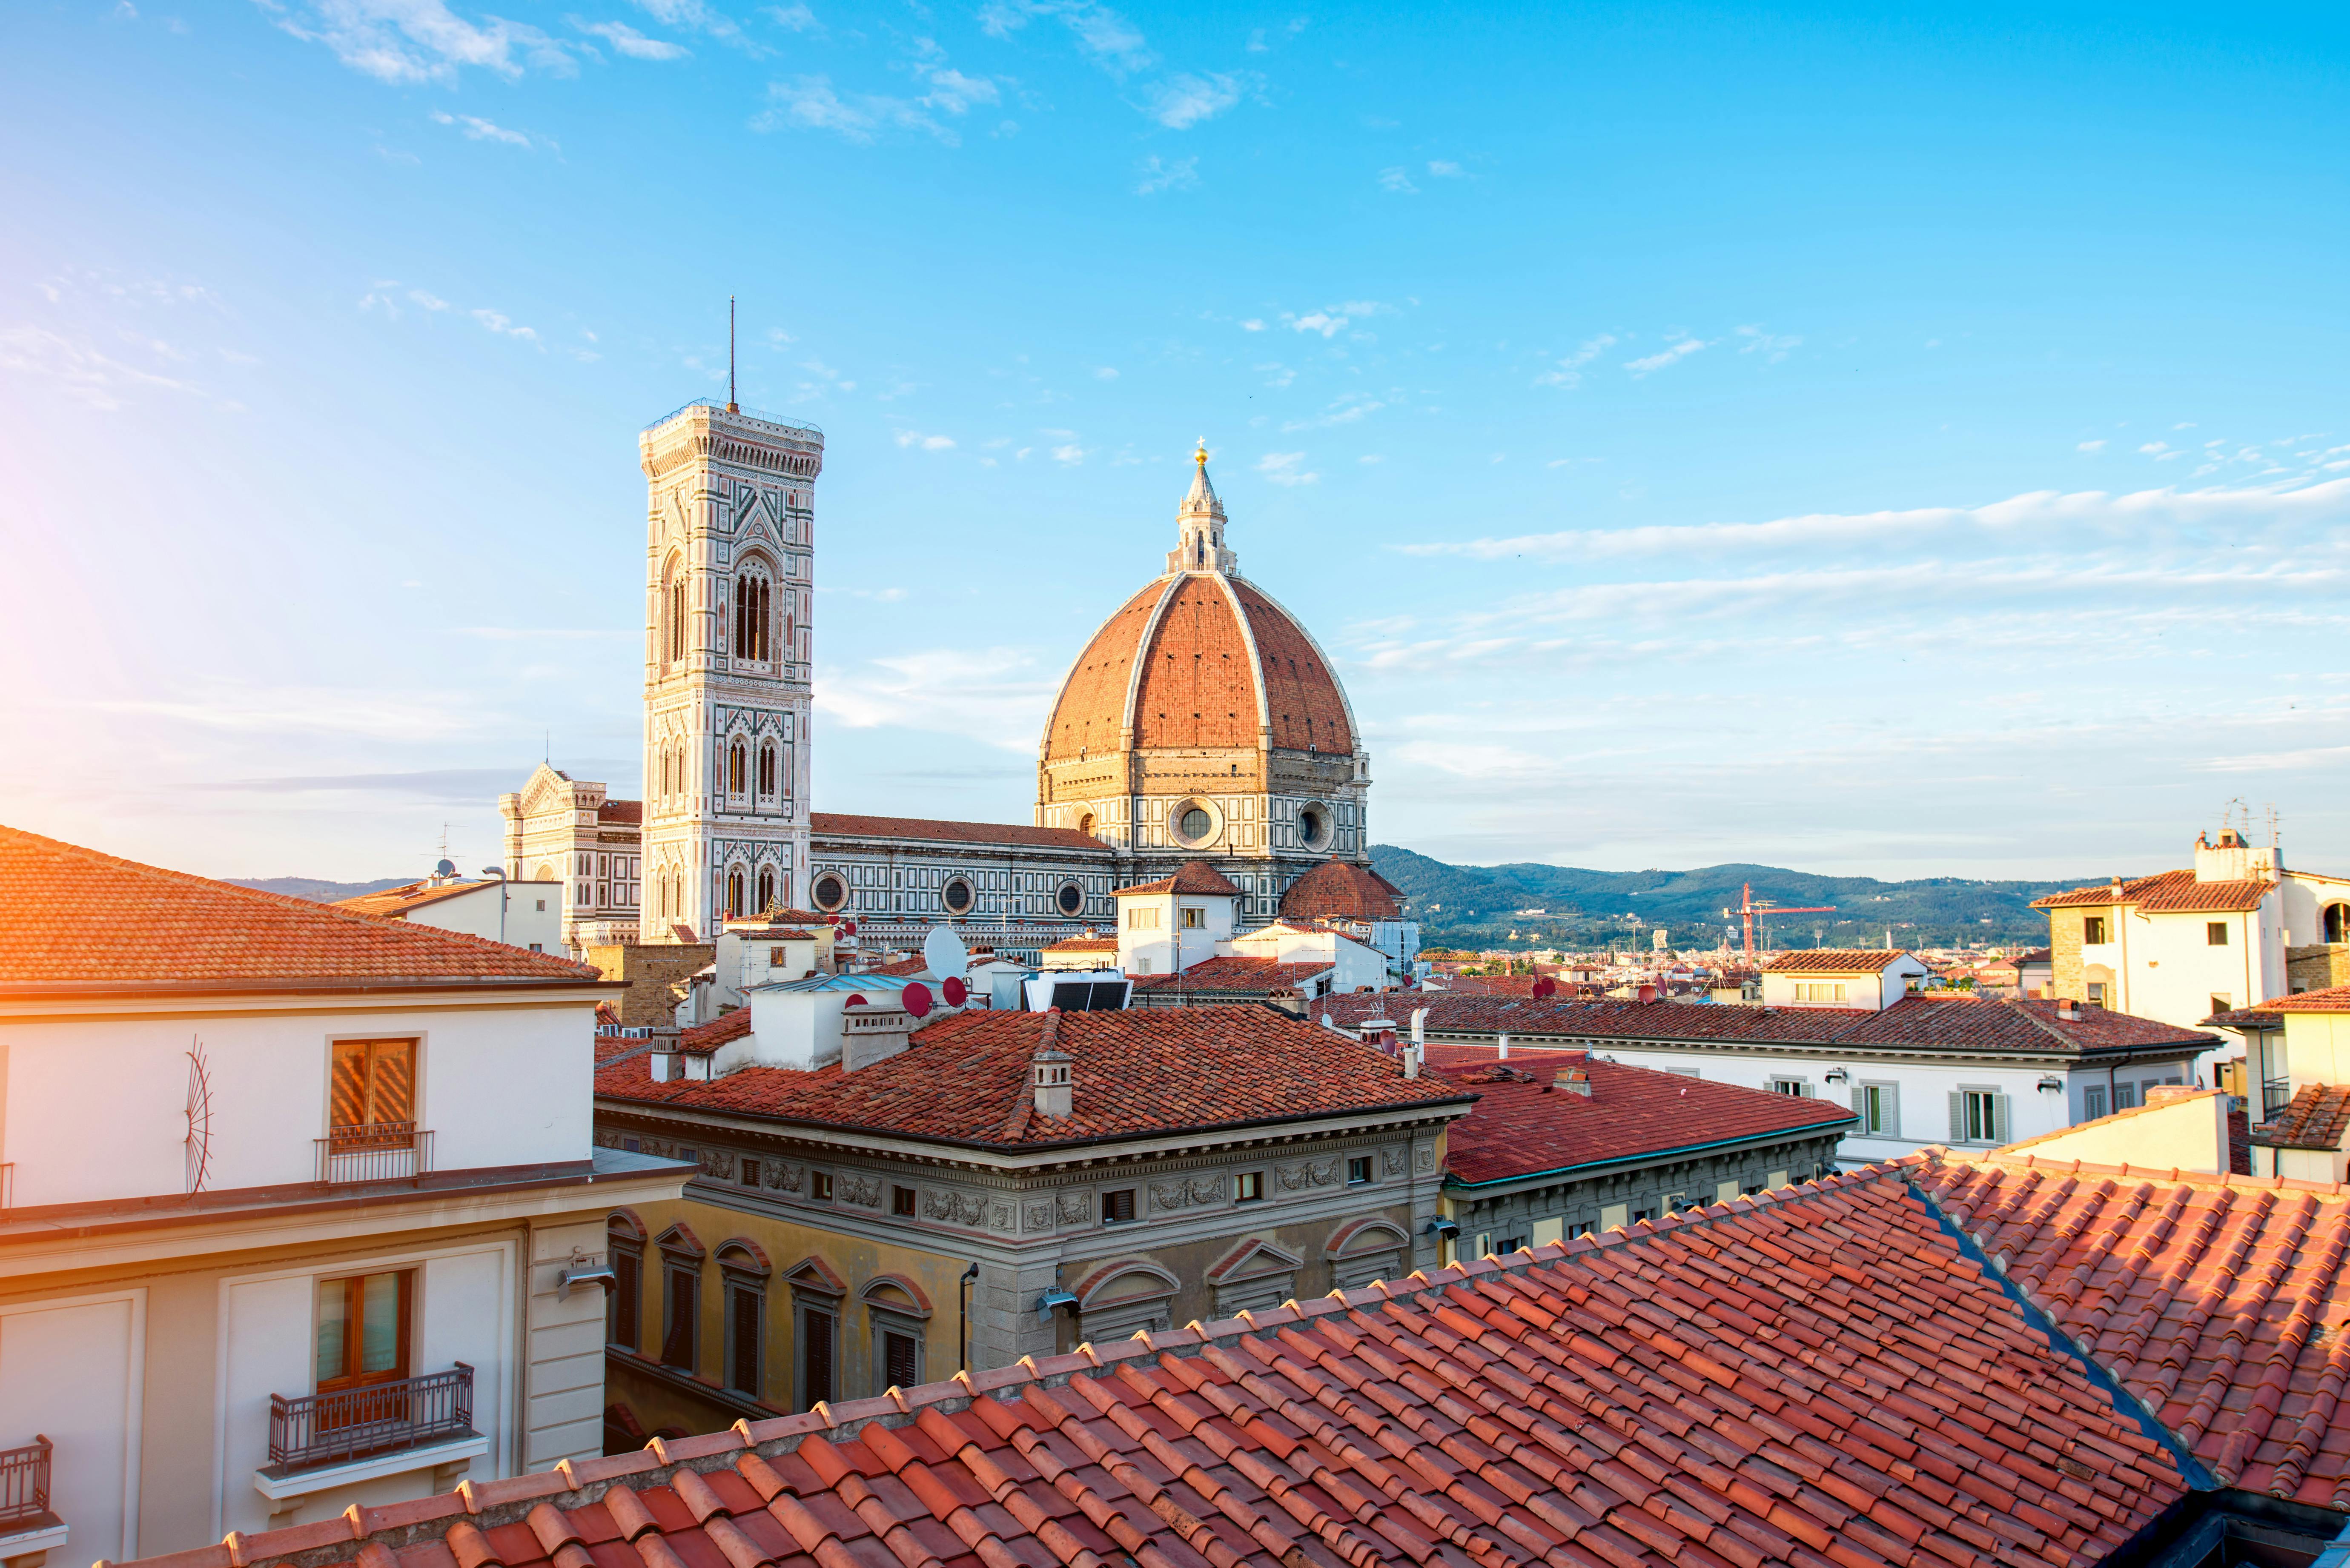 Florence city pass for 1 day with Uffizi, Accademia and Dome